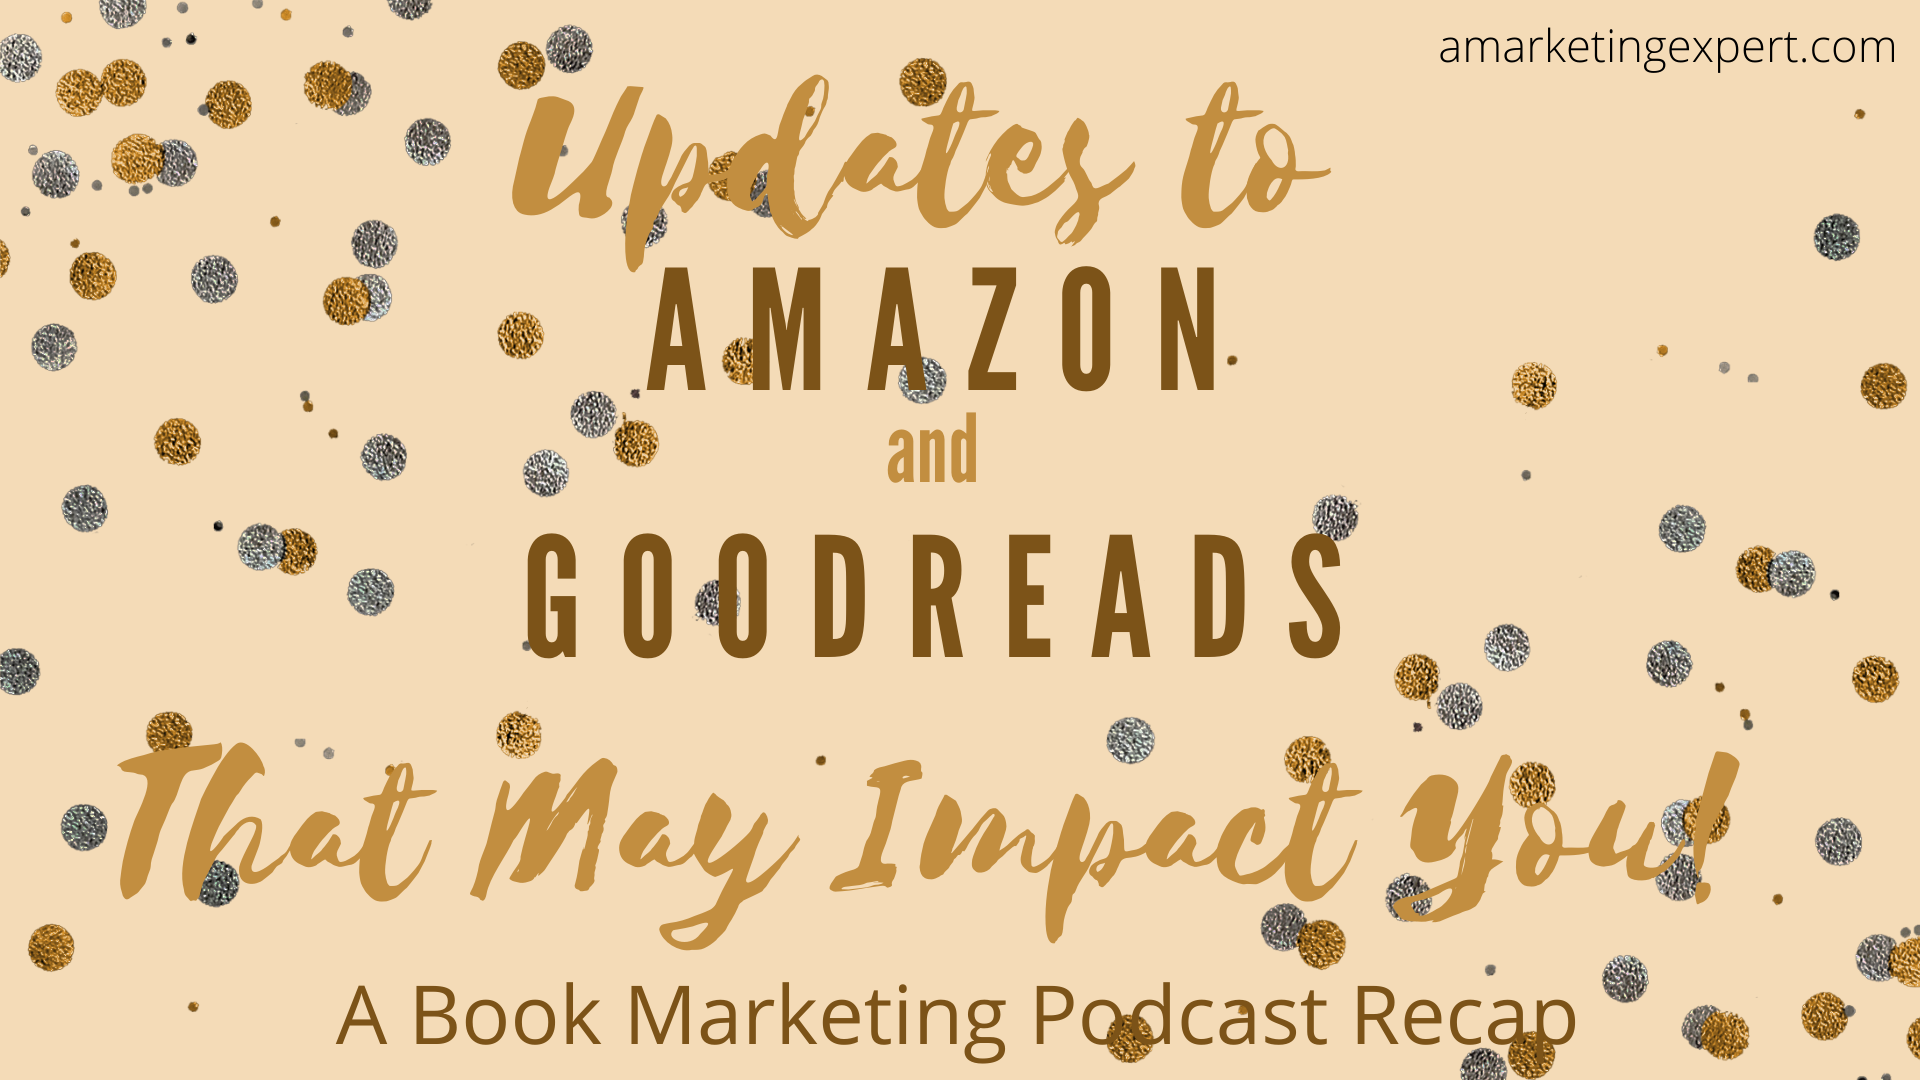 Book Marketing Podcast Recap: Updates to Amazon and Goodreads That May Impact You: Book Updates to Amazon and Goodreads That May Impact You: Marketing Podcast Recap